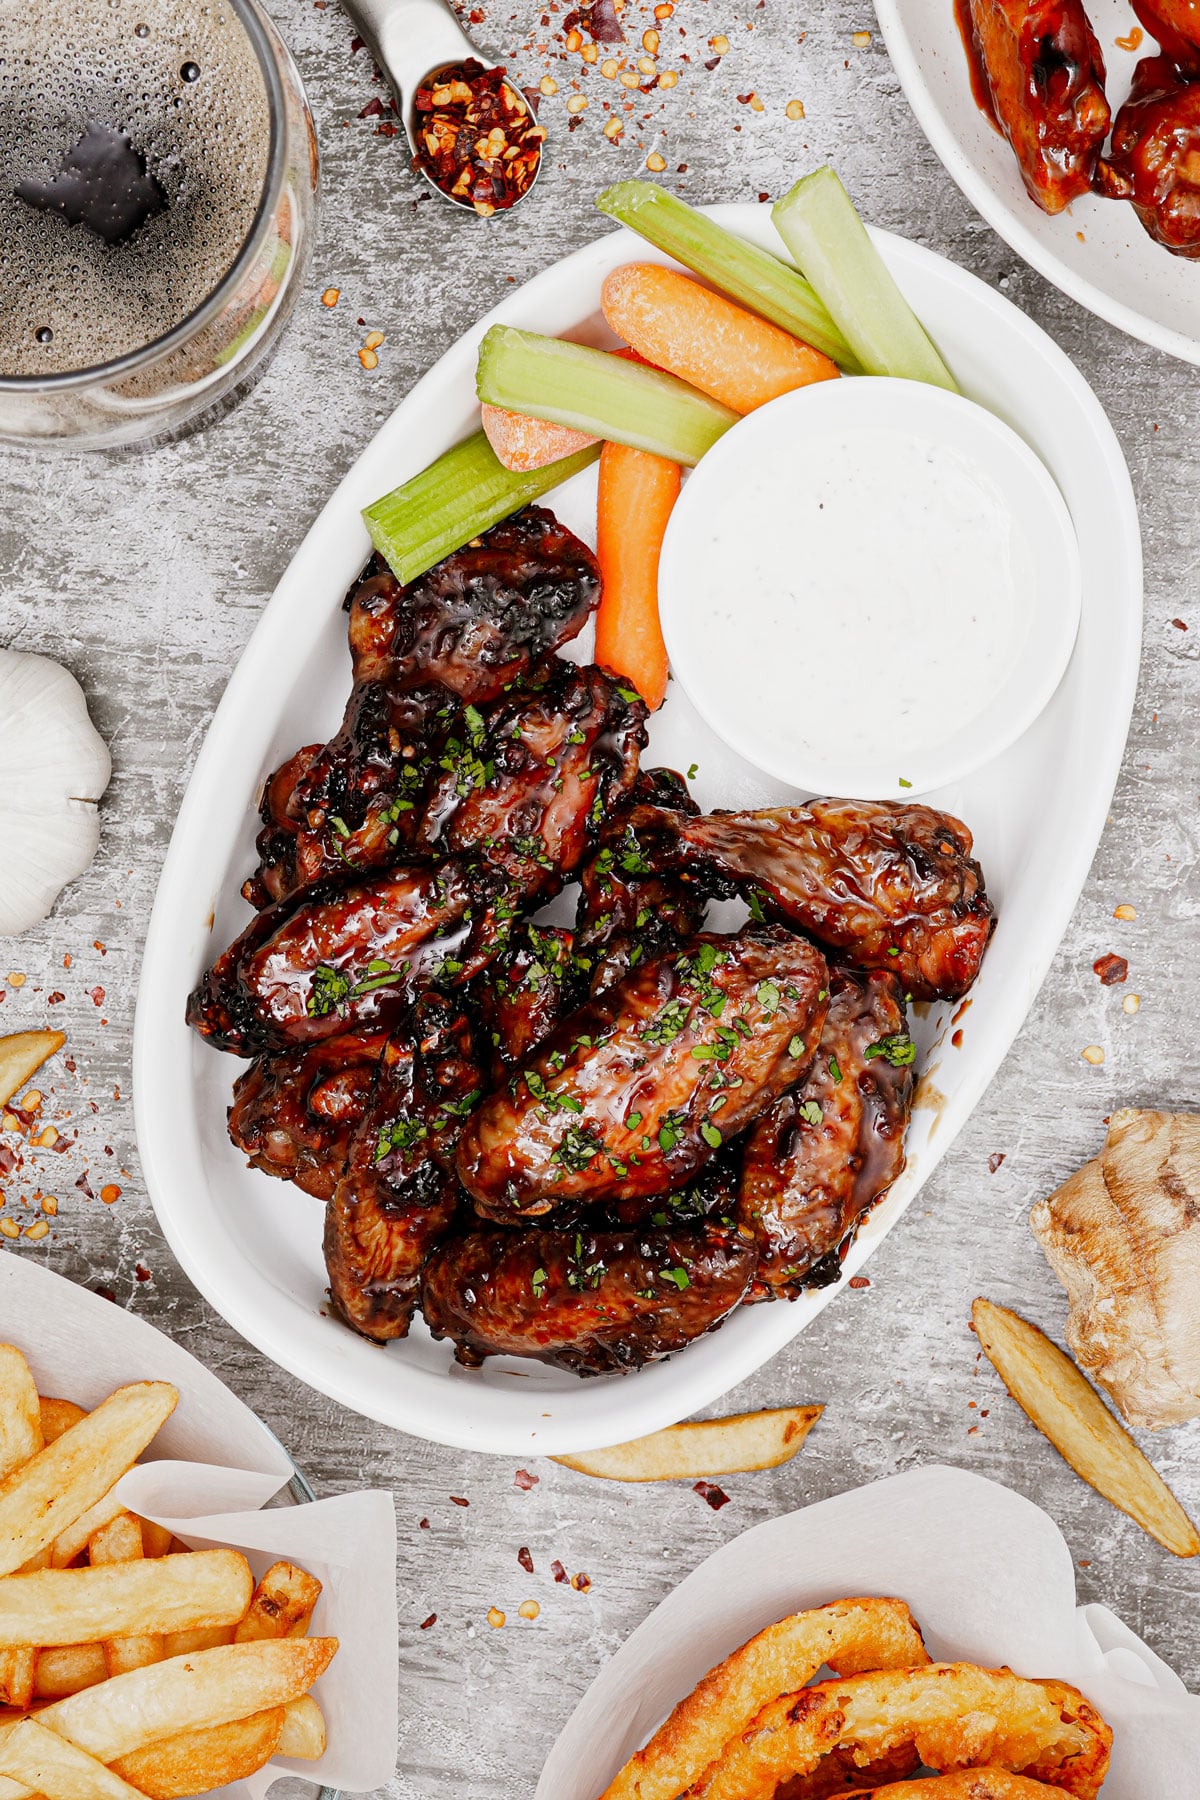 Air fryer honey garlic chicken wings recipe biteshot, on a serving dish with carrots, celery sticks and ranch dipping sauce.